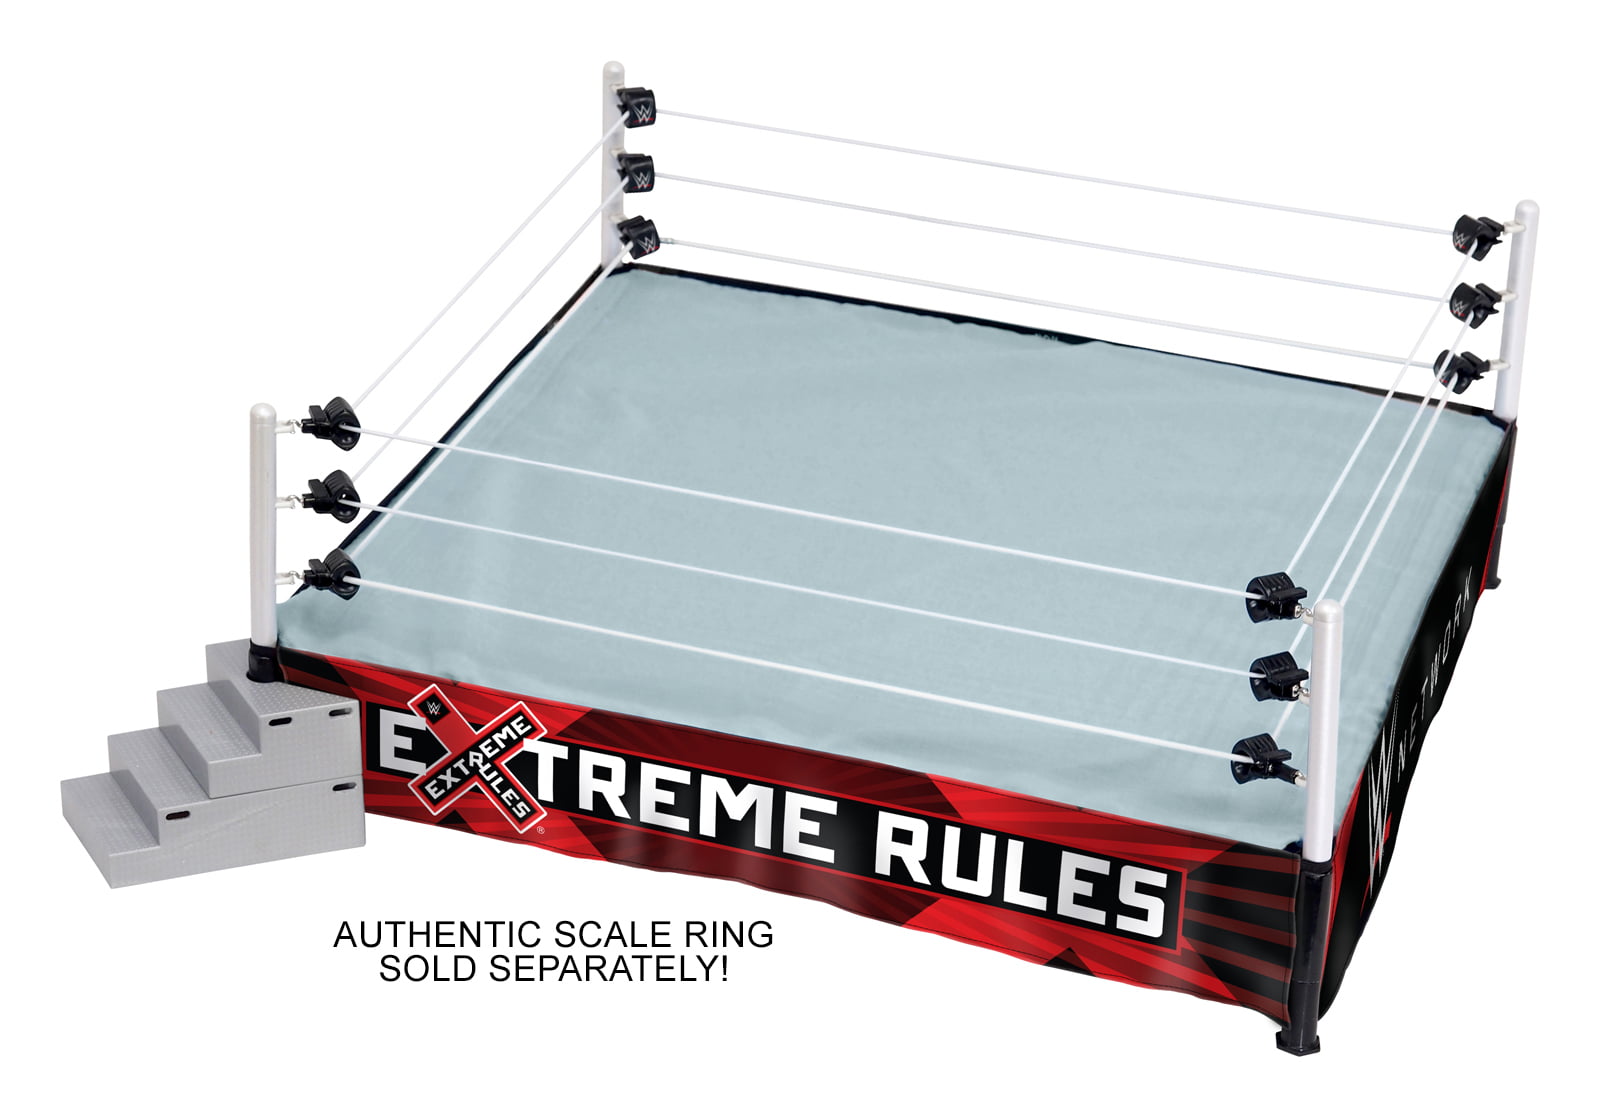 wwe wrestling ring accessories